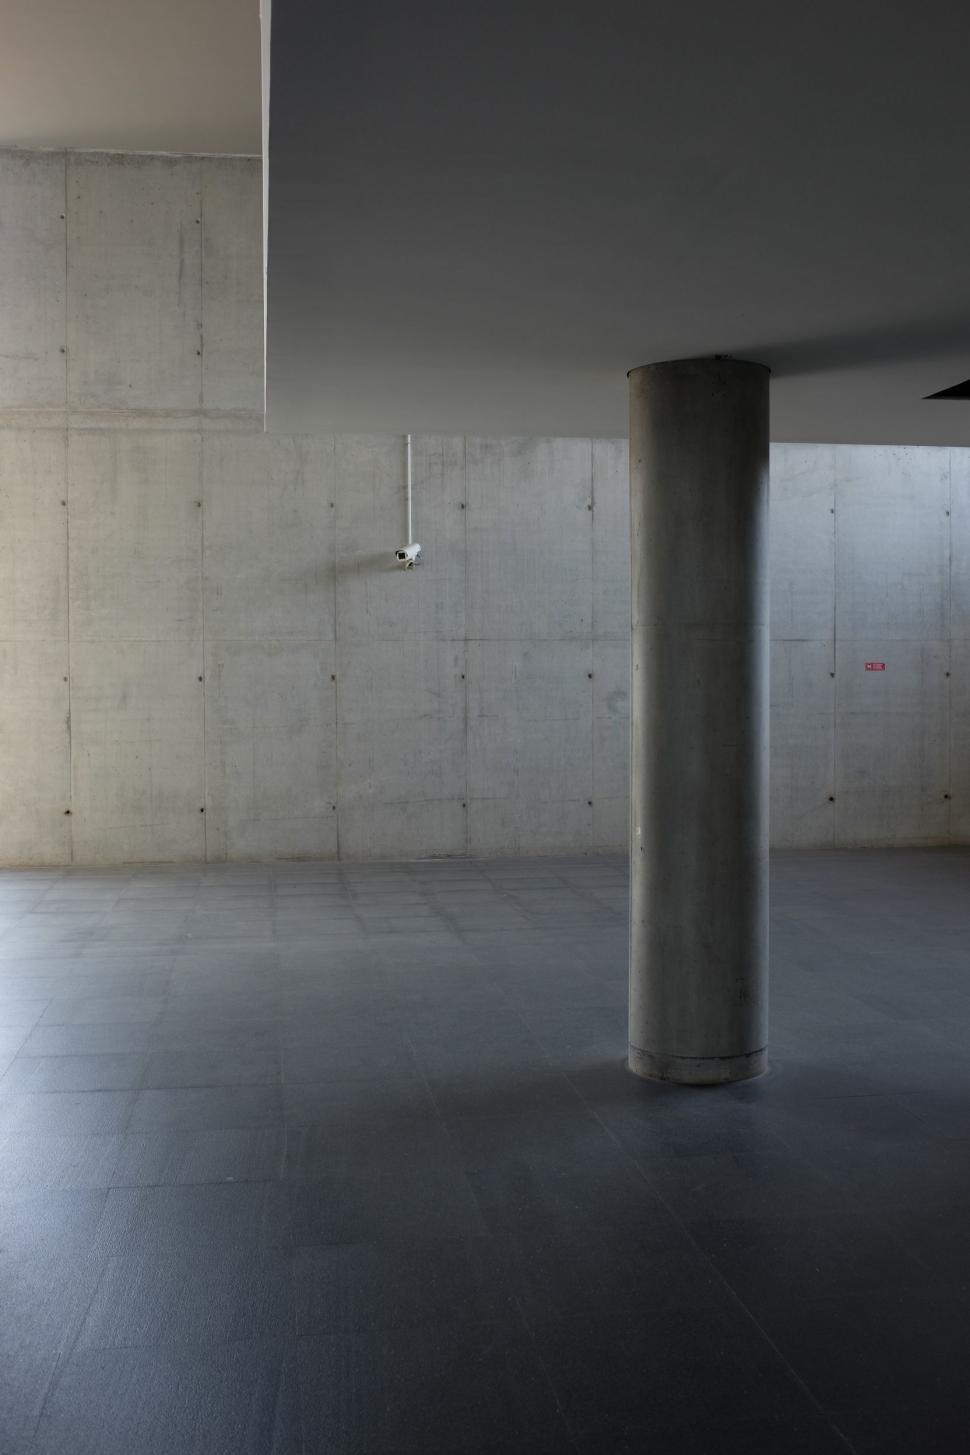 Free Image of Empty Room With Concrete Walls and Columns 